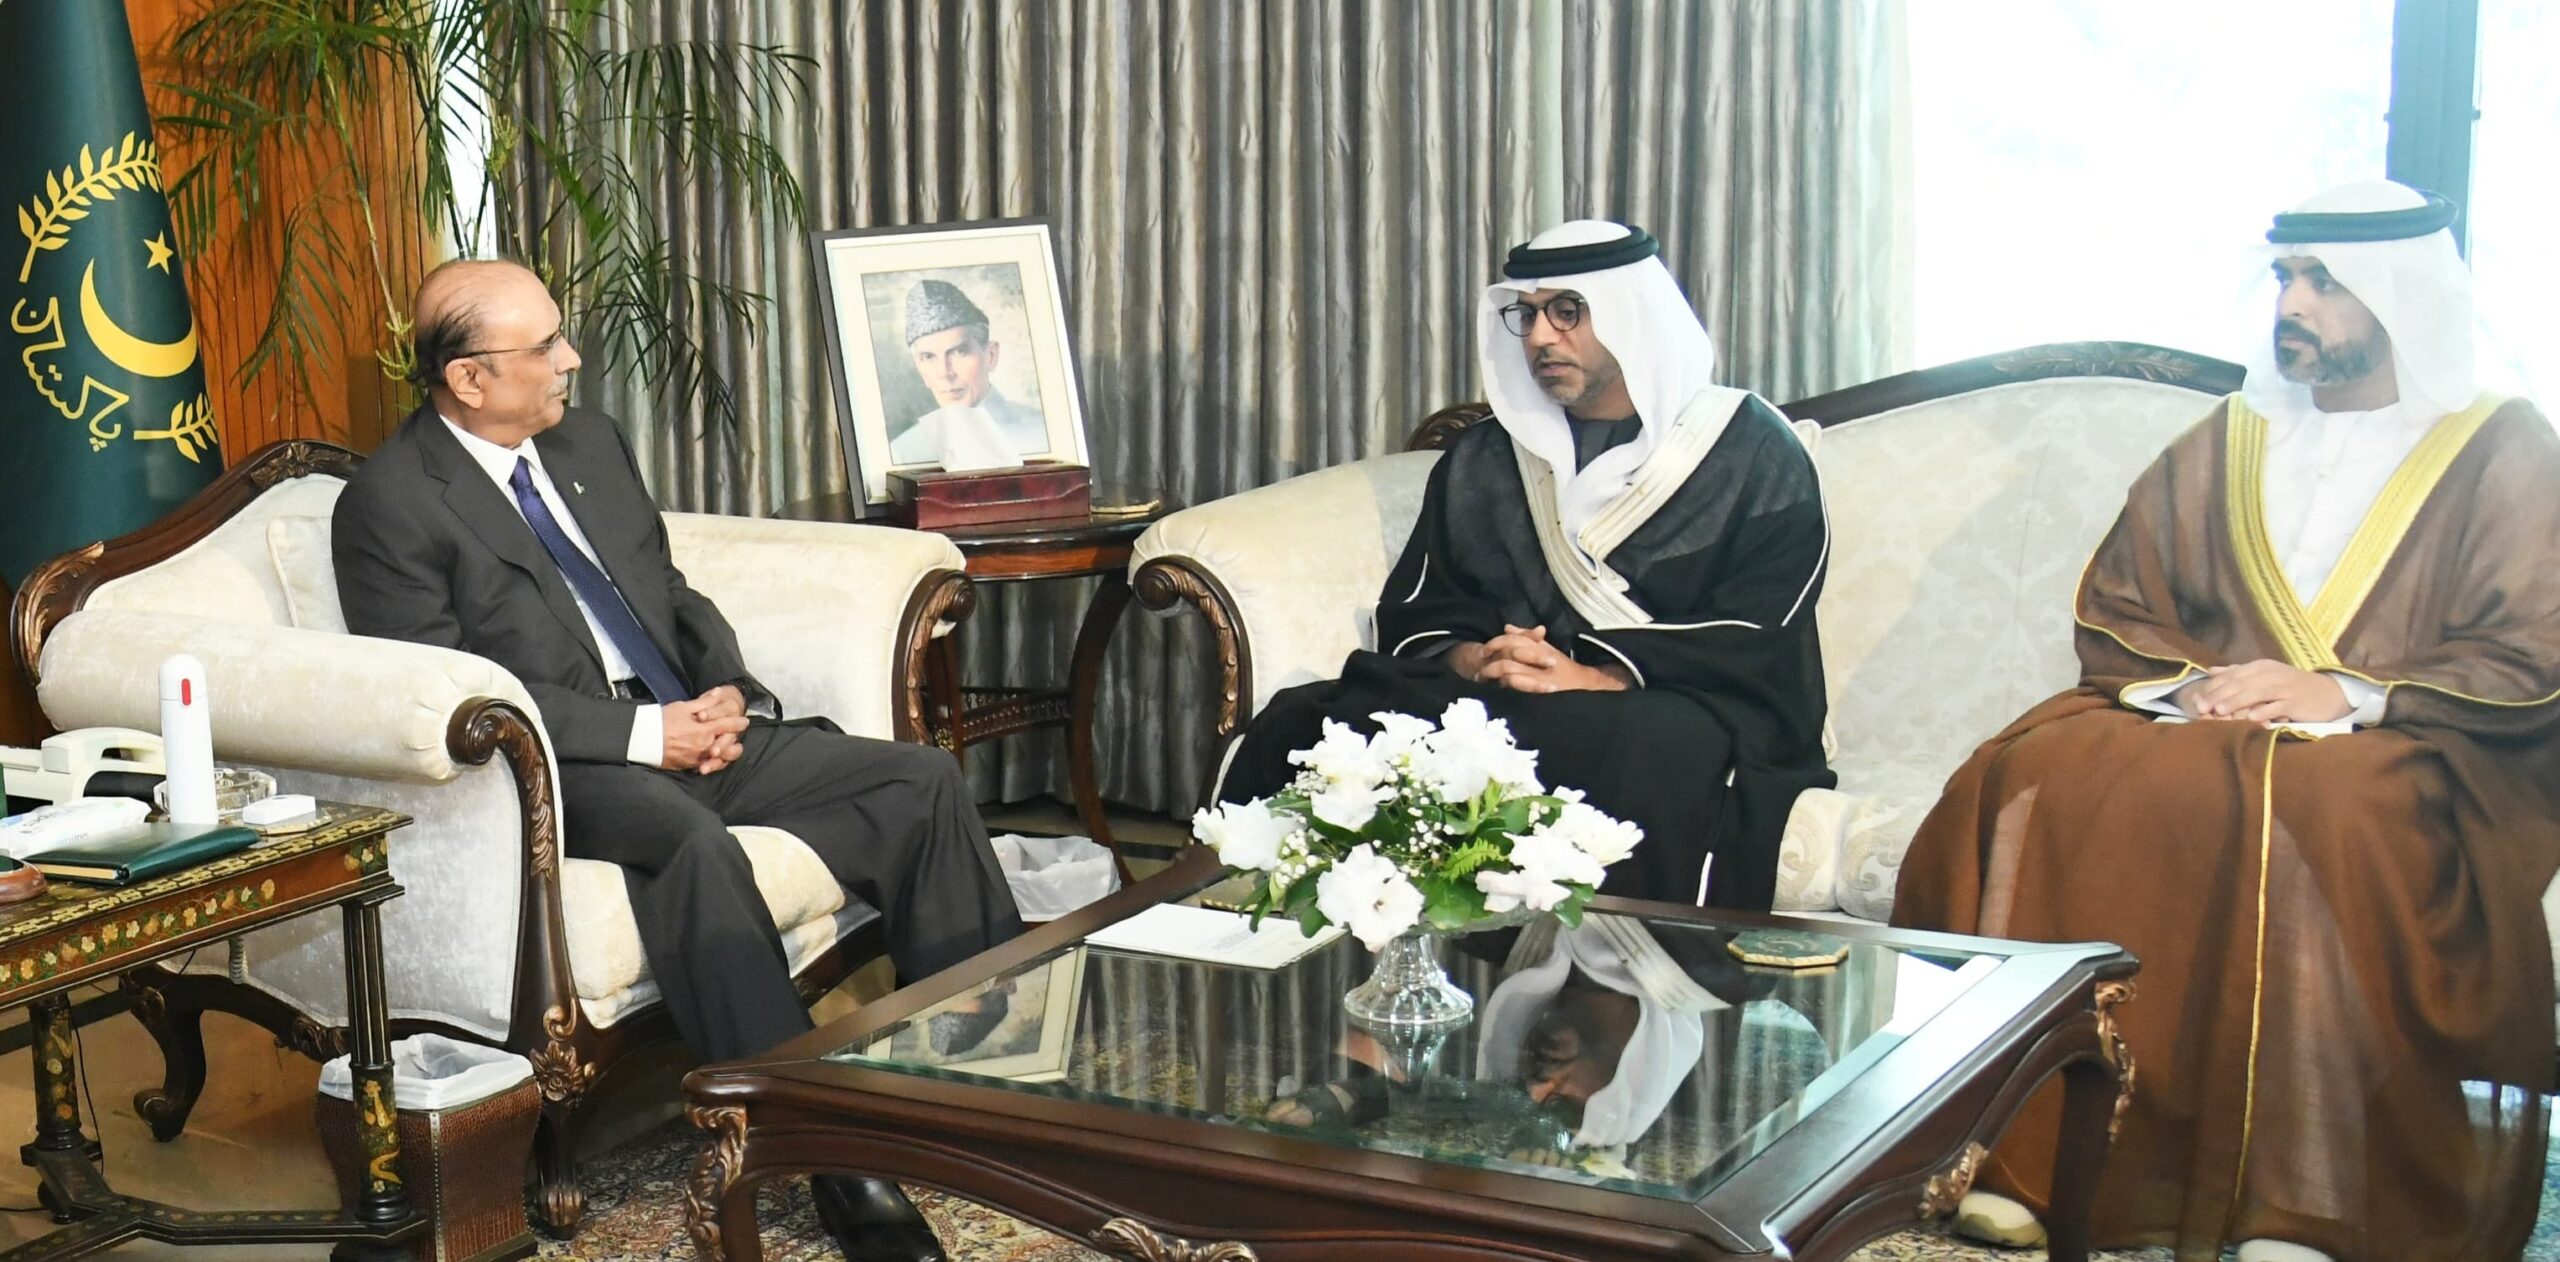 PRESIDENT FOR FURTHER BOOSTING BILATERAL TIES WITH THE UAE.